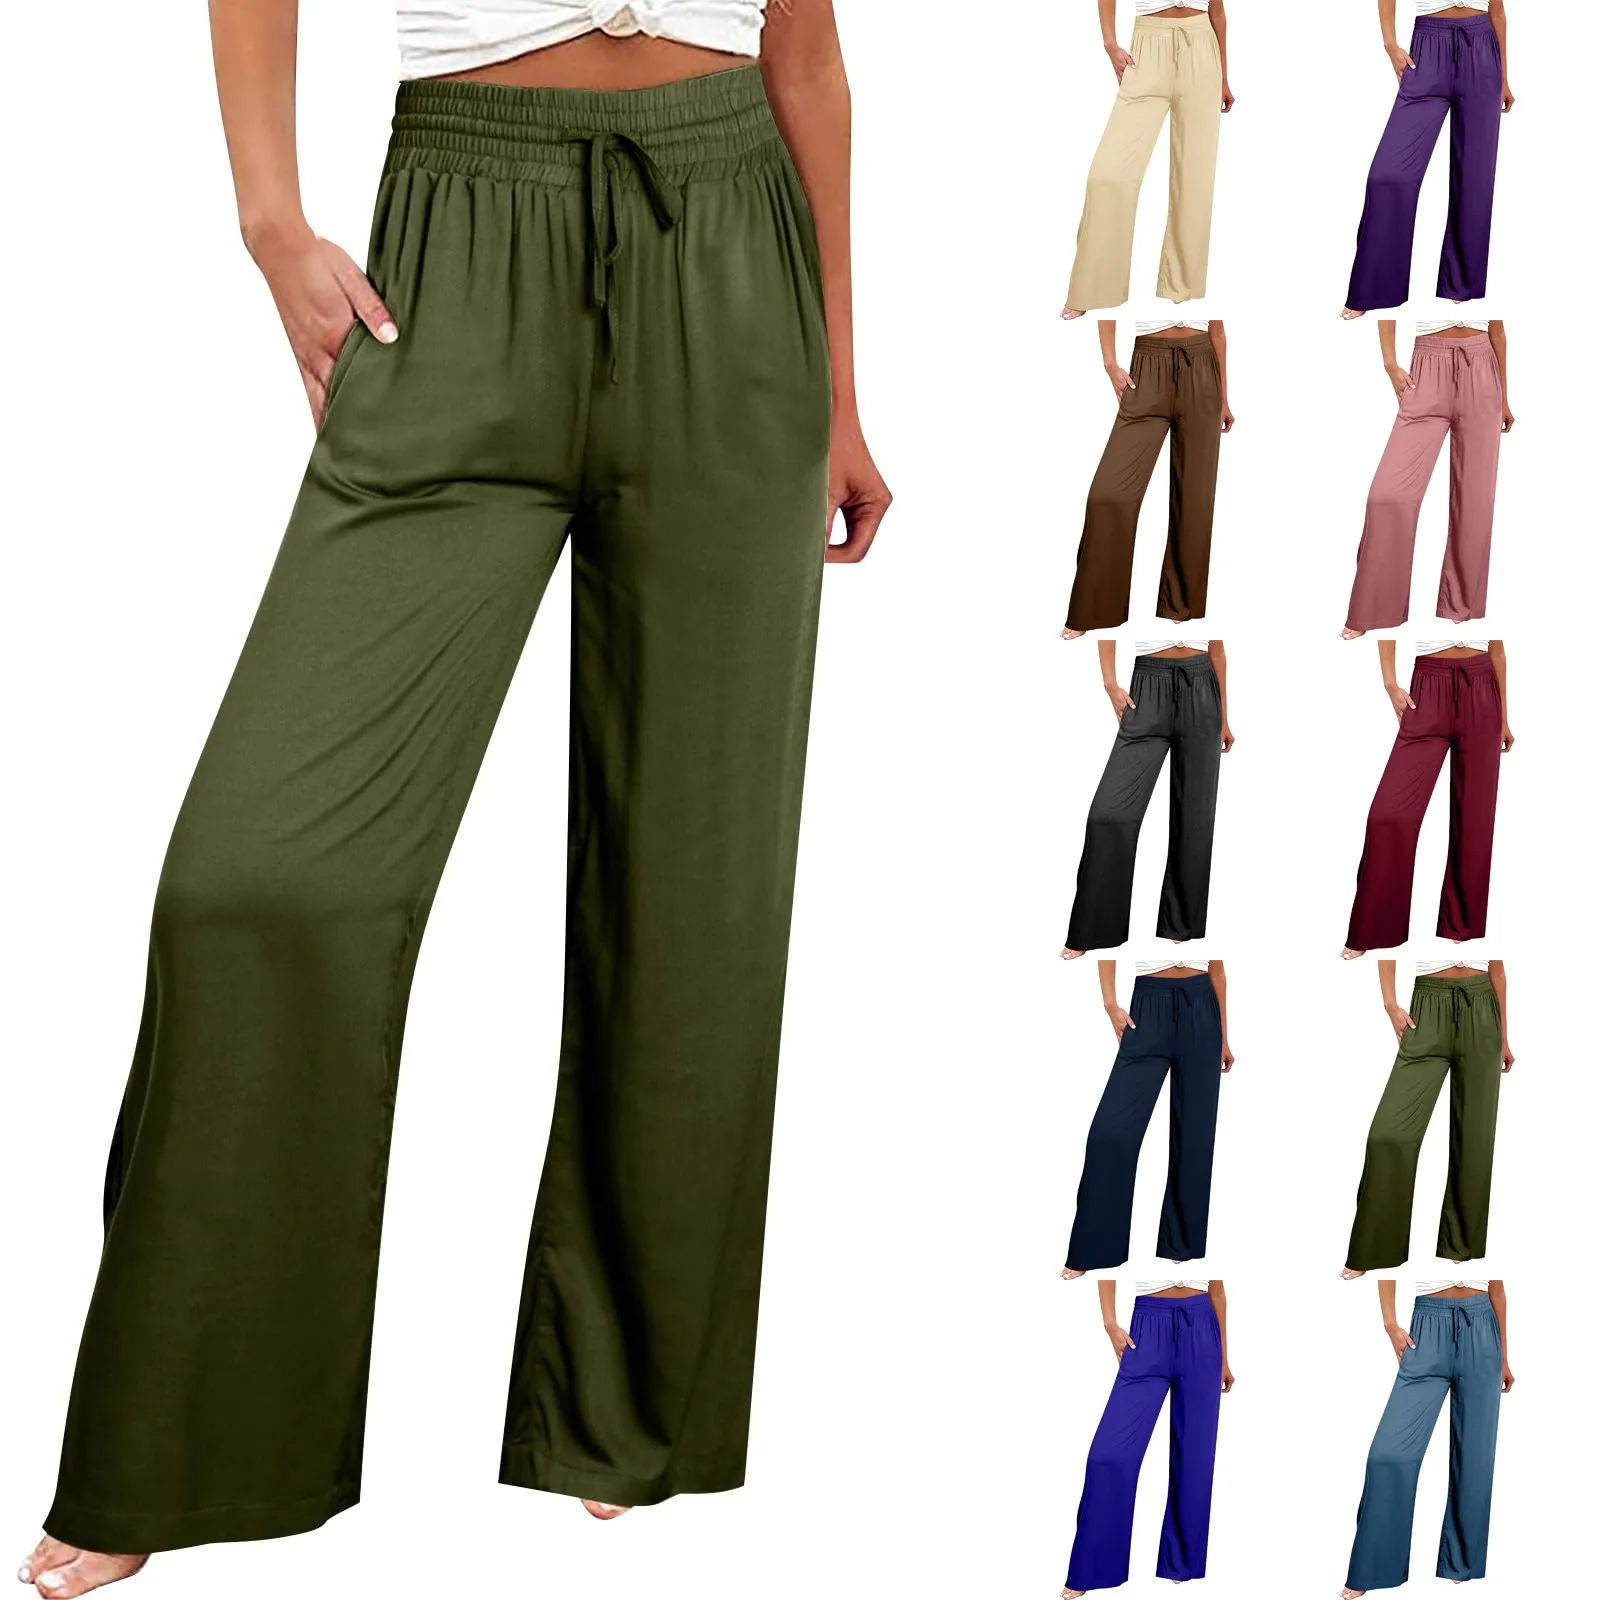 

Wide Leg Pants For Women High Elastic Waist Flowy Palazzo Pants Casual Loose Comfy Trousers With Pockets pantalon femme